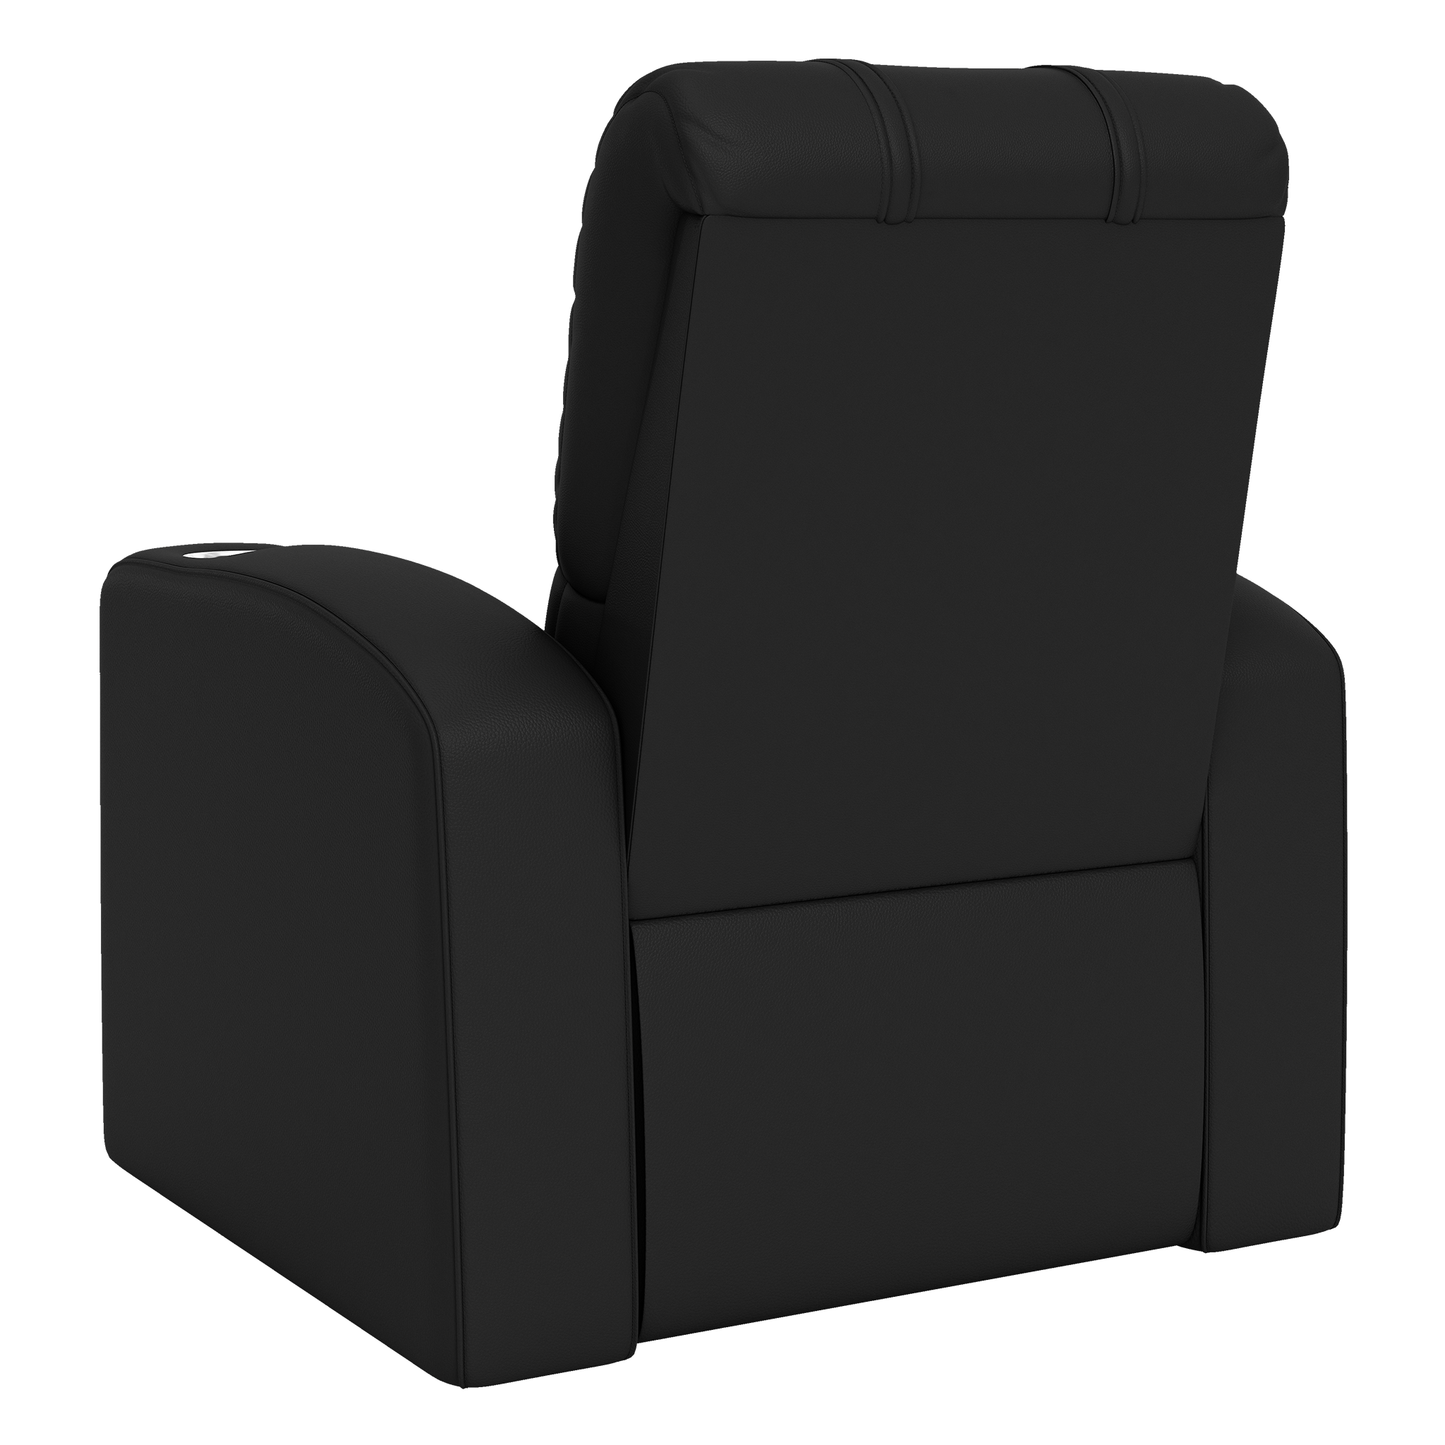 Relax Home Theater Recliner with New York Yankees Logo